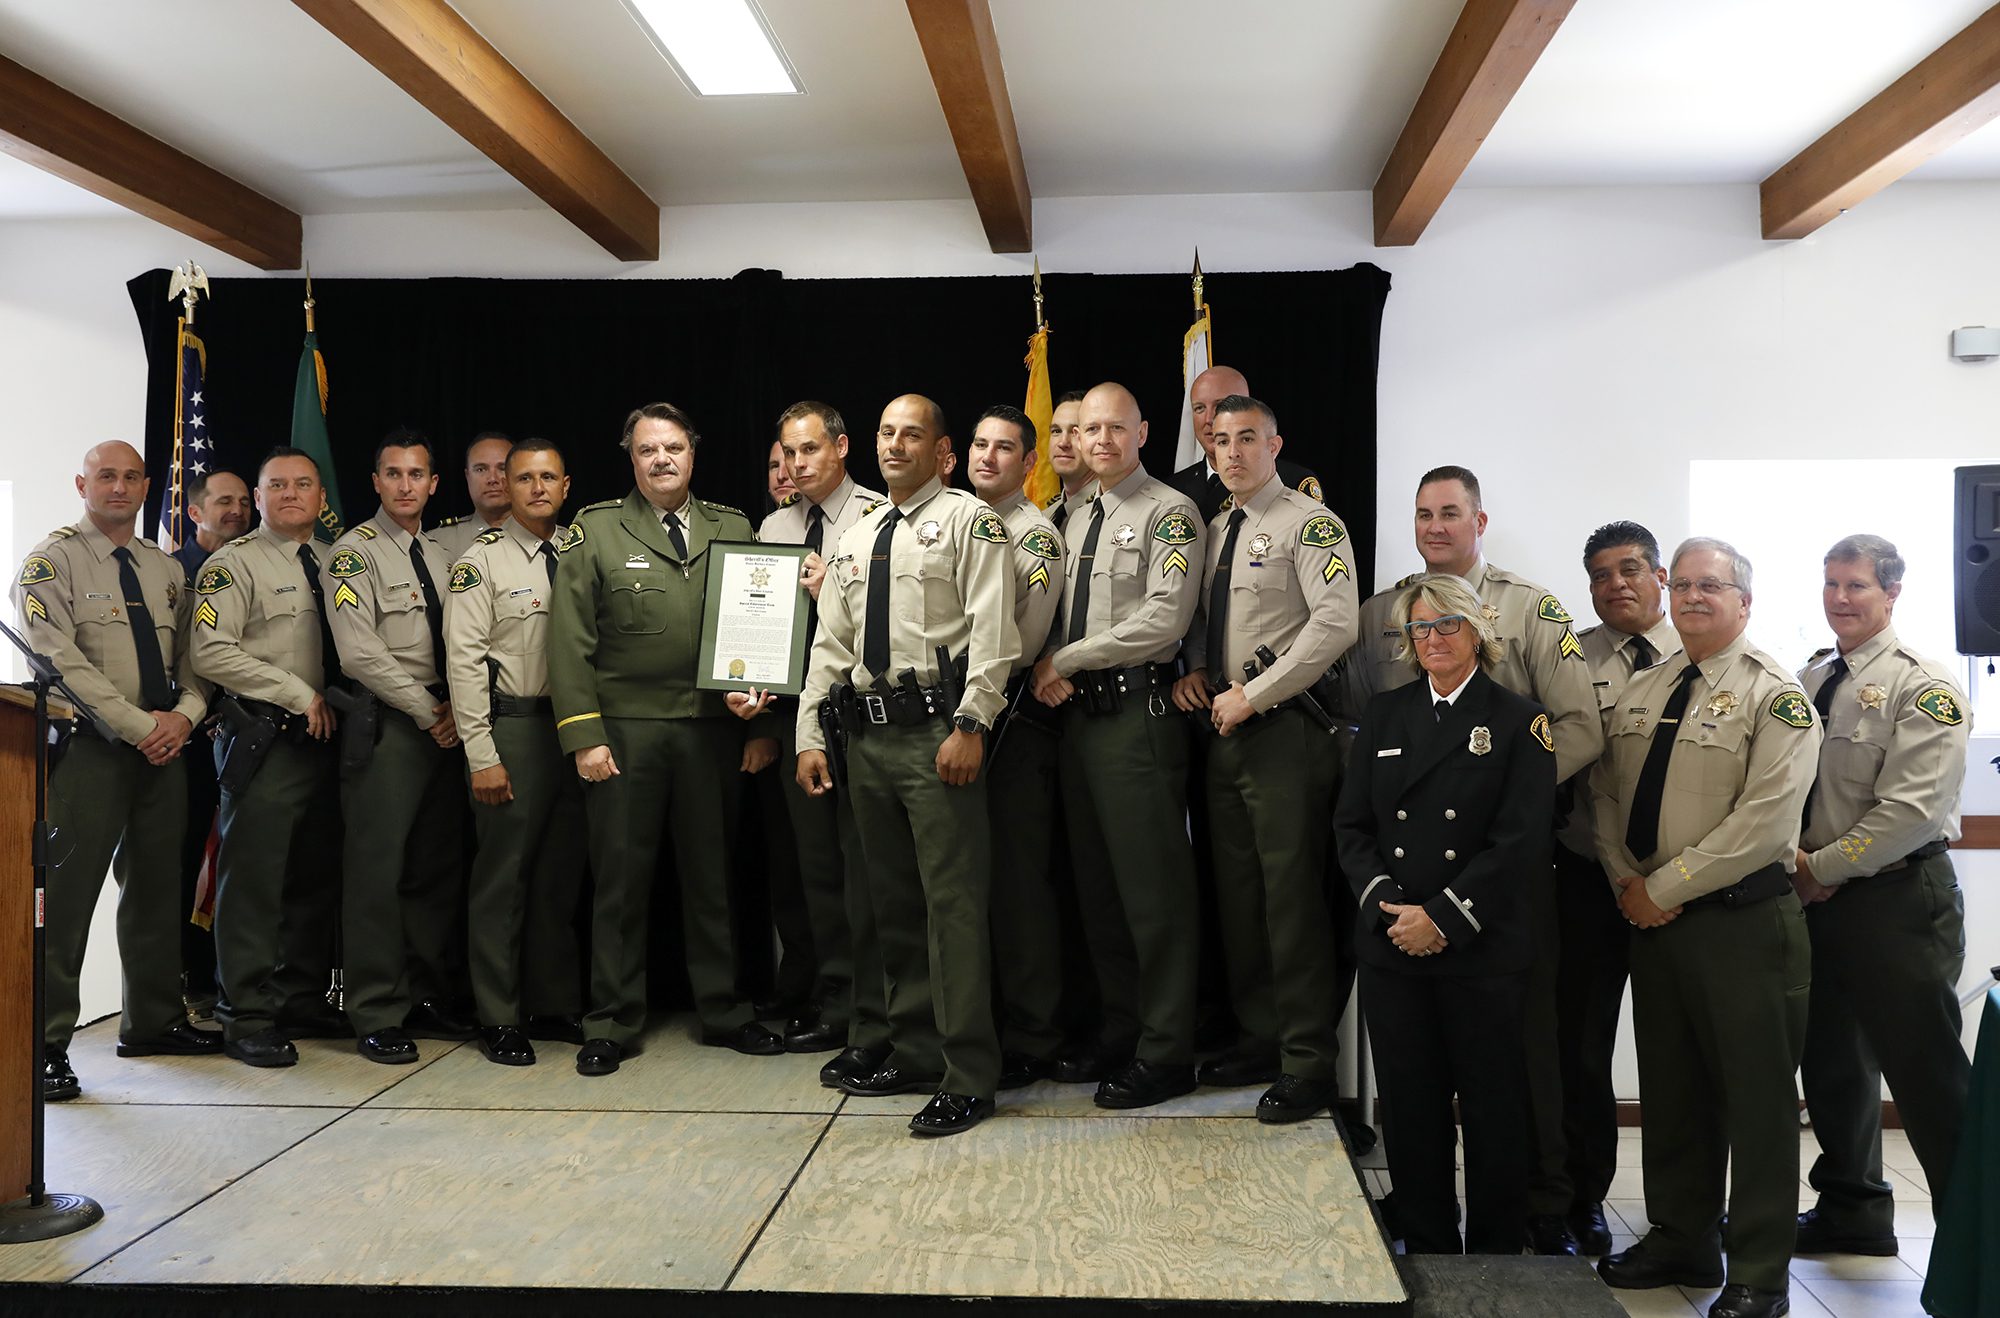 Sheriff’s employees honored for exemplary performance